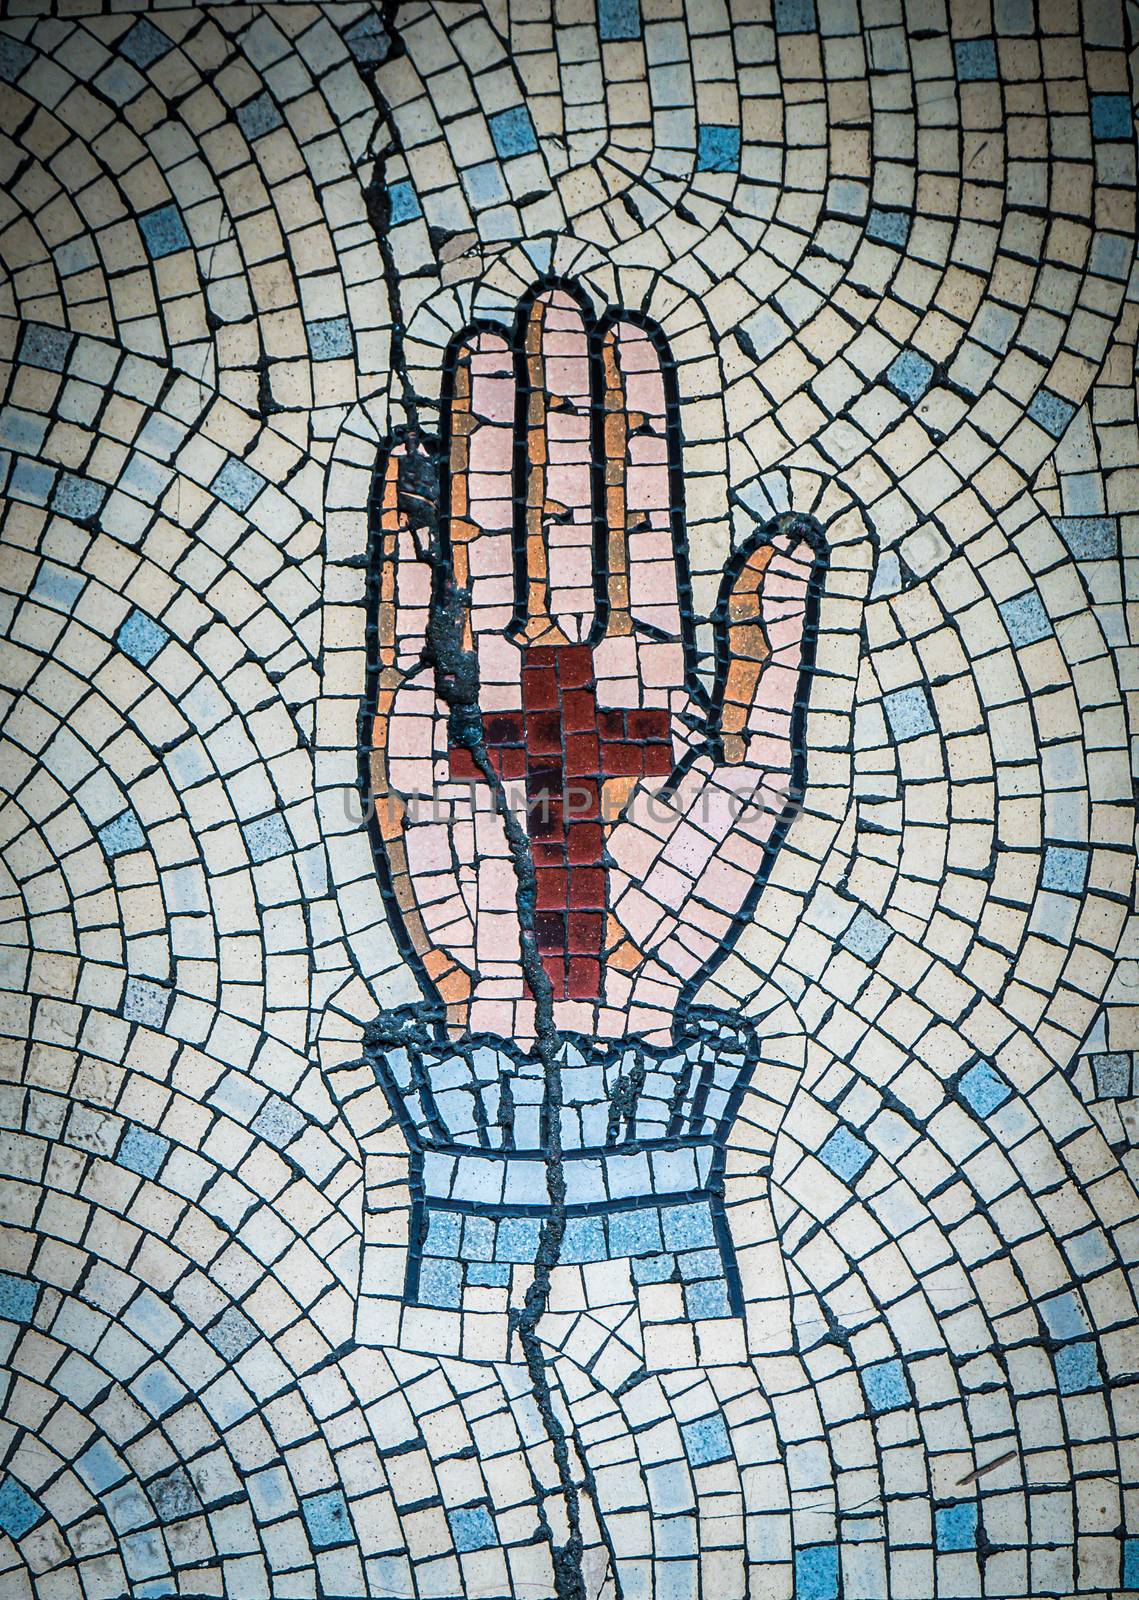 Ancient Mosaic Tiles Of Hand And Crucifix In Crossmyloof Glasgow, Scotland, Uk